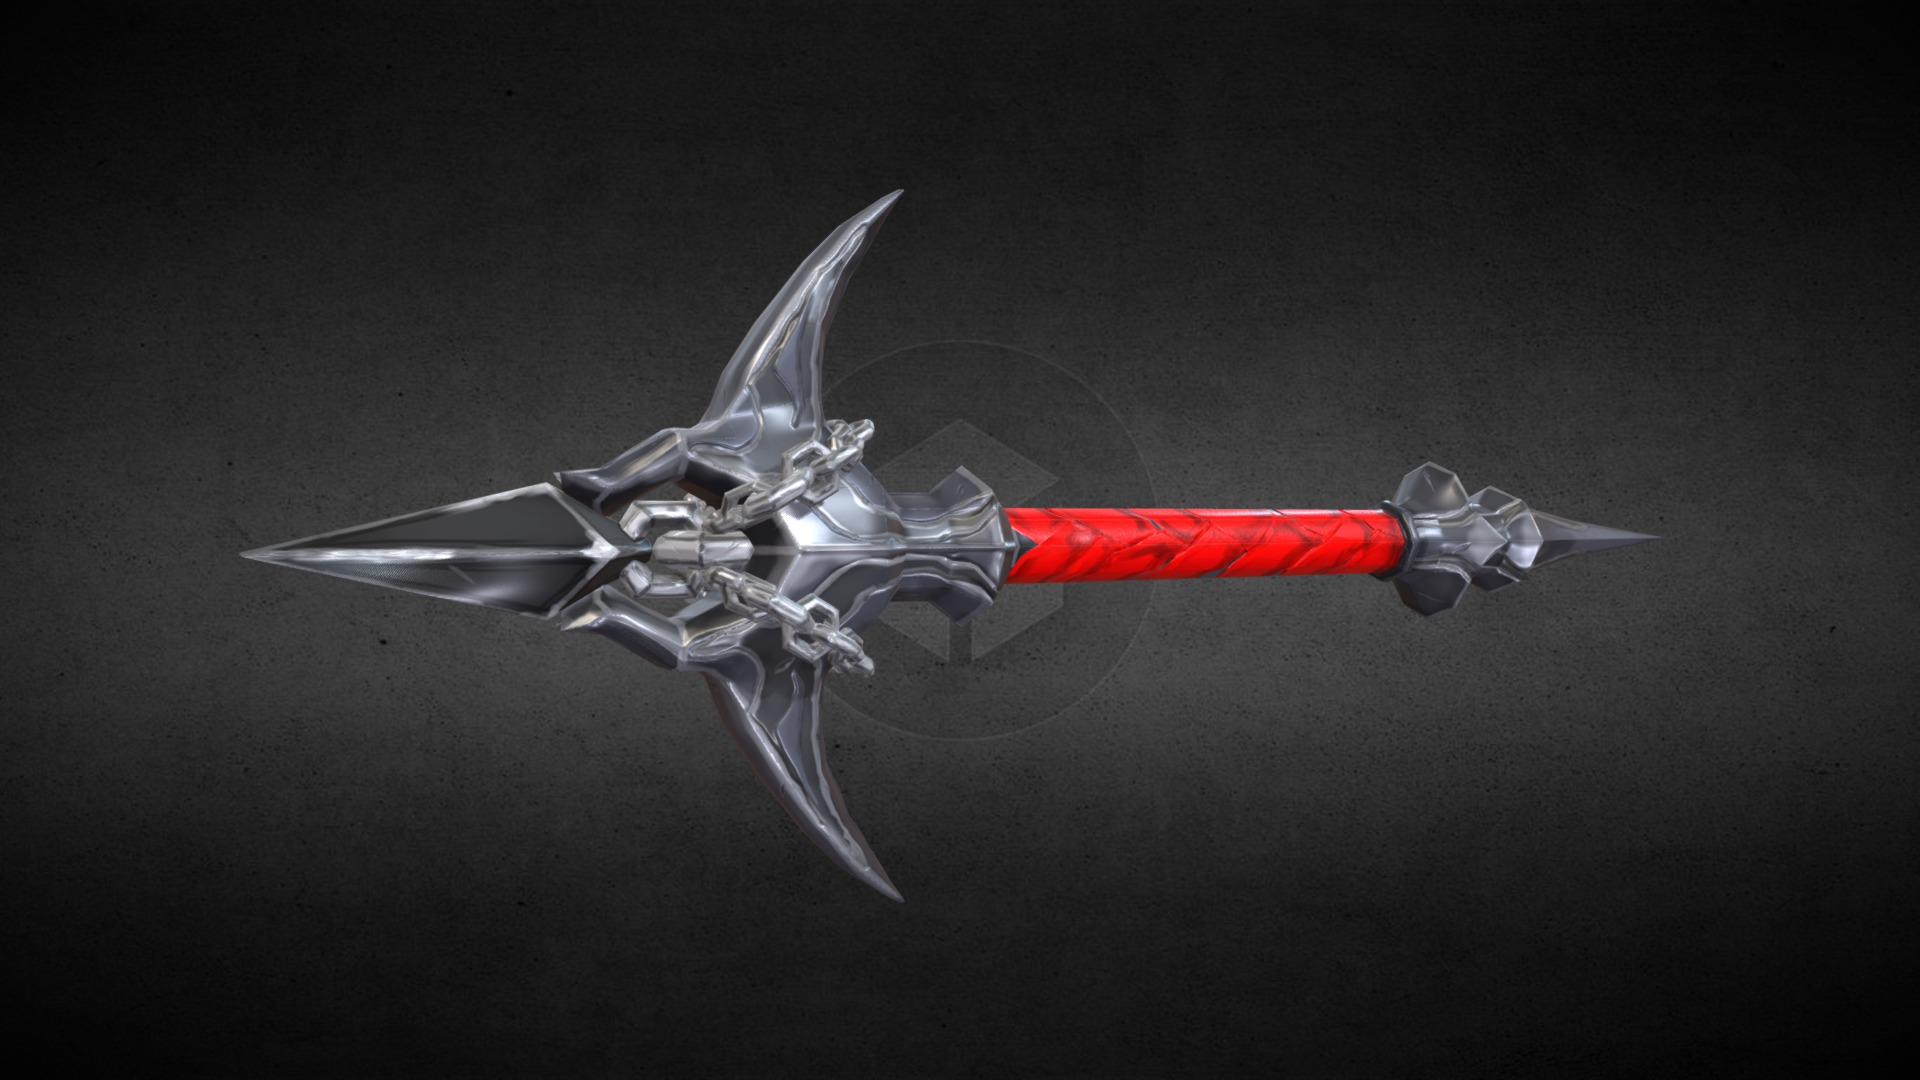 The Classic Whip of the Belmont Family from Castlevania series made as a practice ready for a game engine it has 4524 verts 1740 polys 3472 tris and the textures are 1024 x 1024 the textures are pbr and includes Diffuse, Specular and Normal map if you need game assets for your games or STL files I am available for commission works 3d model